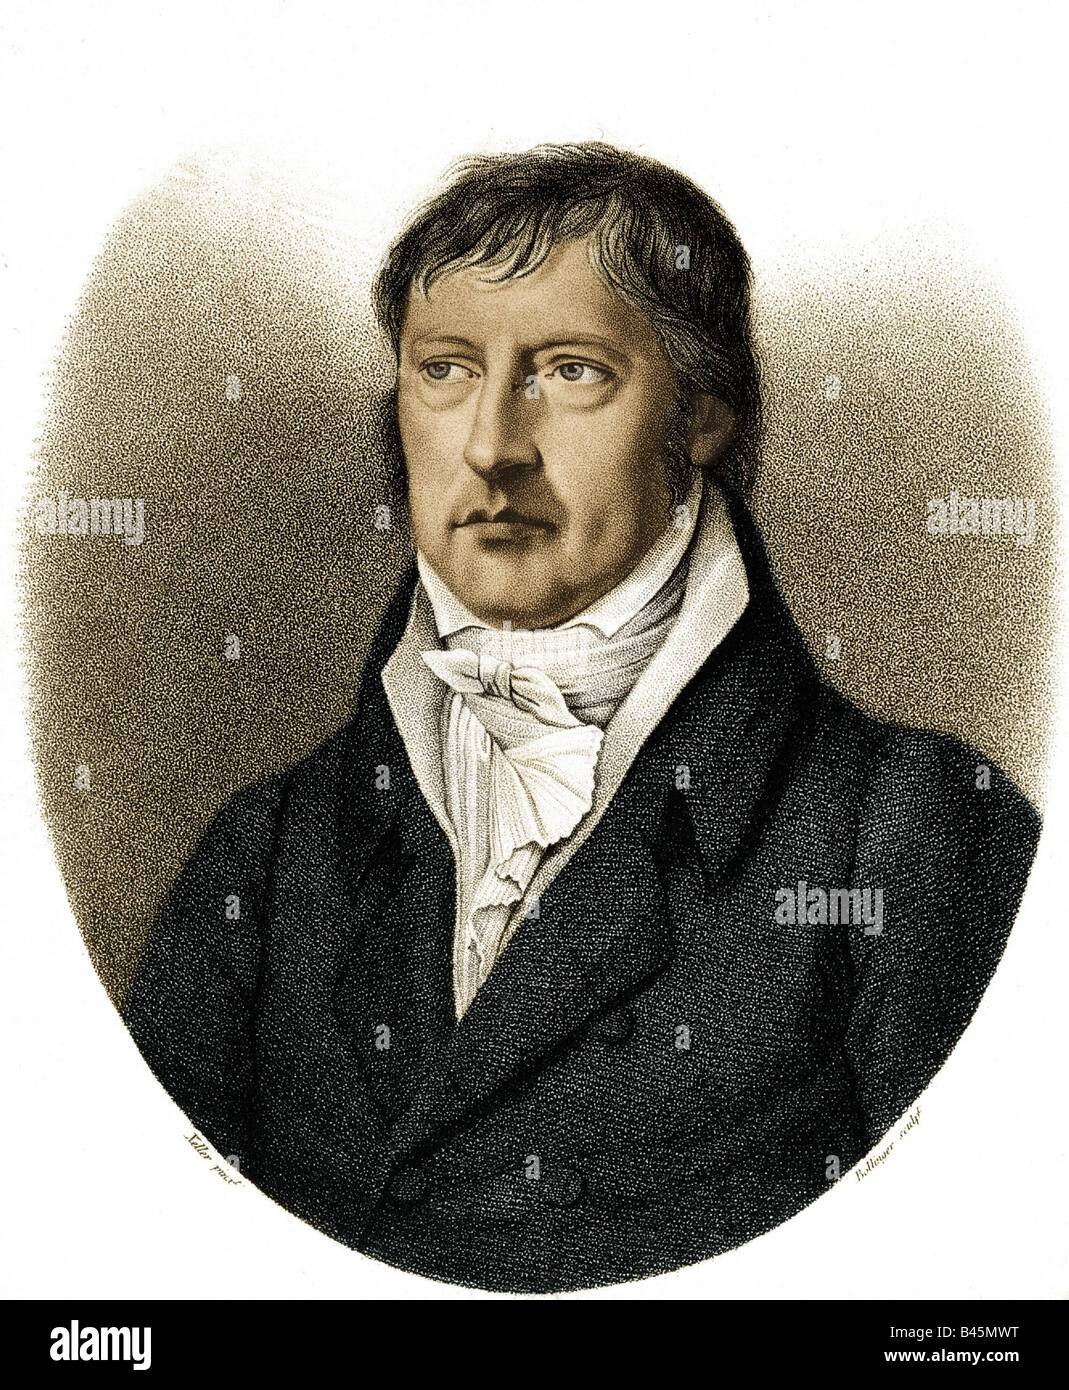 Hegel, Georg Wilhelm Friedrich, 27.8.1770 - 14.11.1831, German philosopher, author, portrait, engraving by Friedrich Wilhelm Bollinger ( 1777 - 1825 ) after painting by Zeller, 19th century, absolute idealism, , Artist's Copyright has not to be cleared Stock Photo